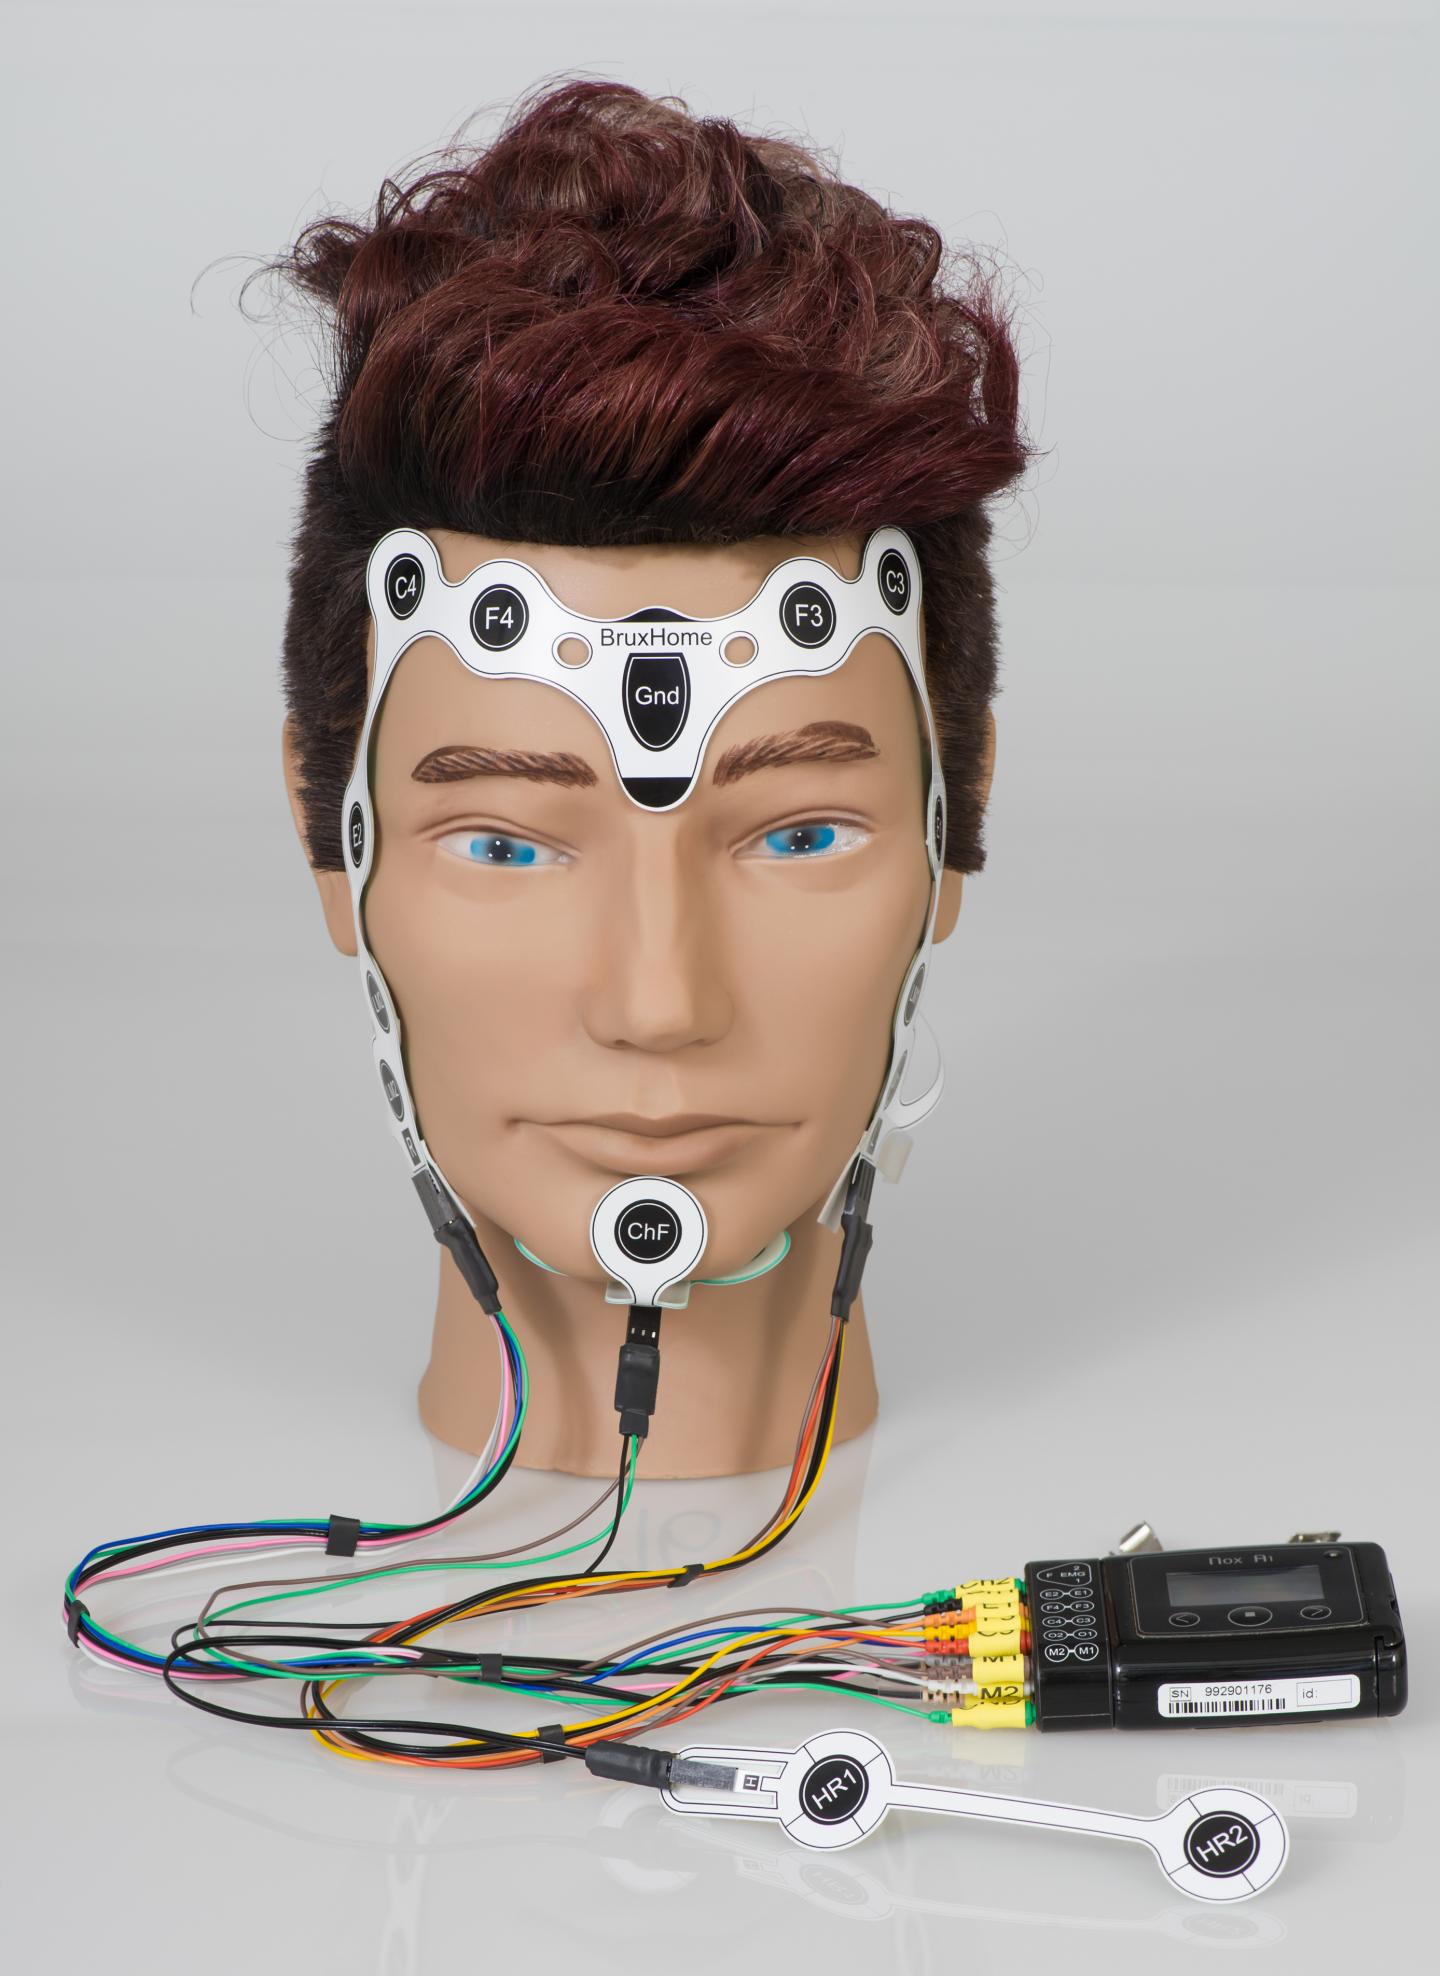 New Polysomnography Electrode Set Enables Easy At-Home Assessment of Sleep Bruxism